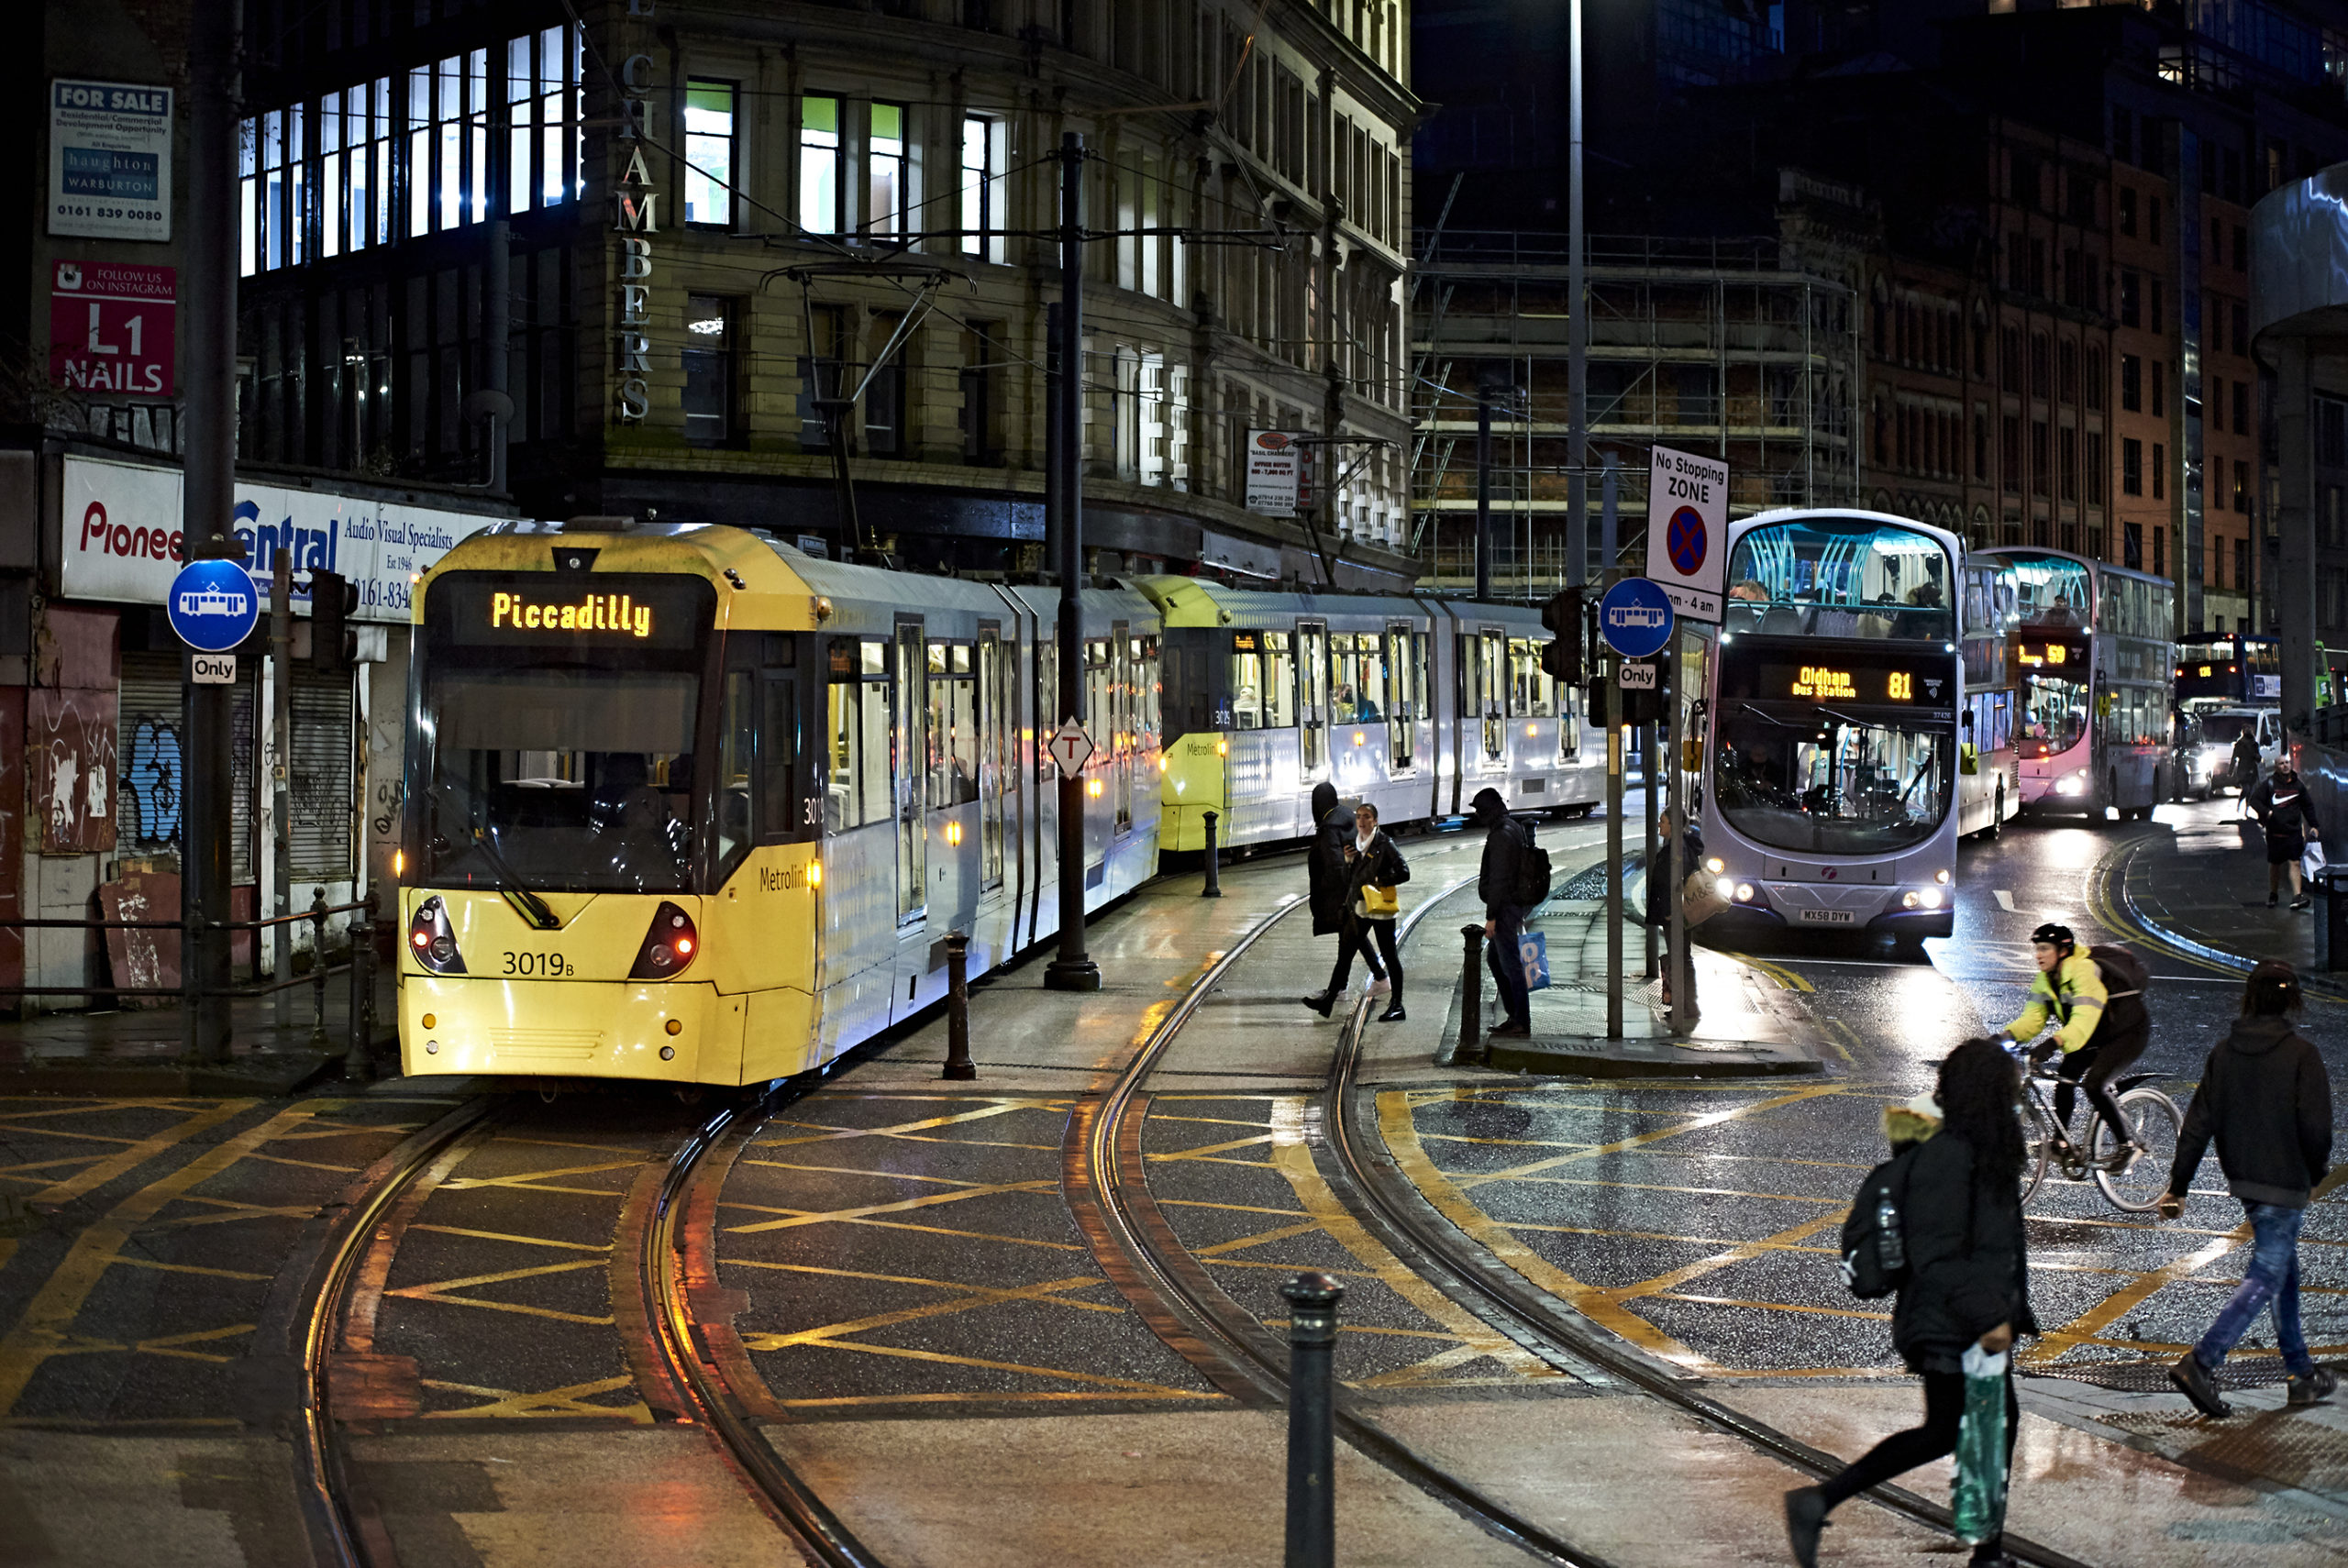 Manchester bus franchising decision nears